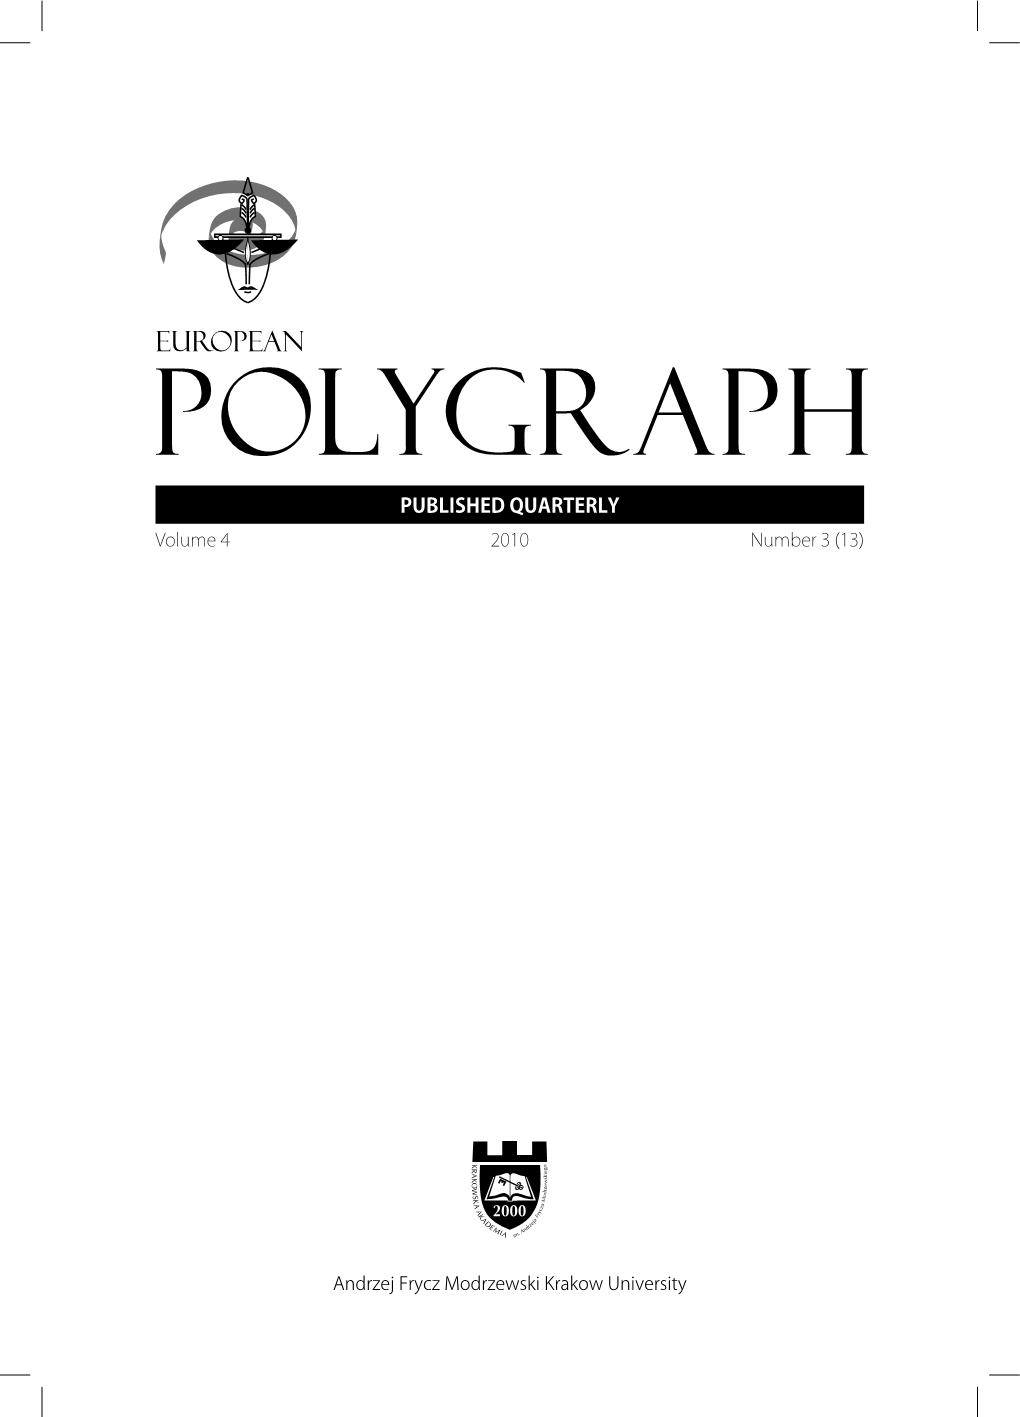 Review of Materials and Proceedings from Conference on Using the Polygraph in Forensic and Human Resource Studies Cover Image